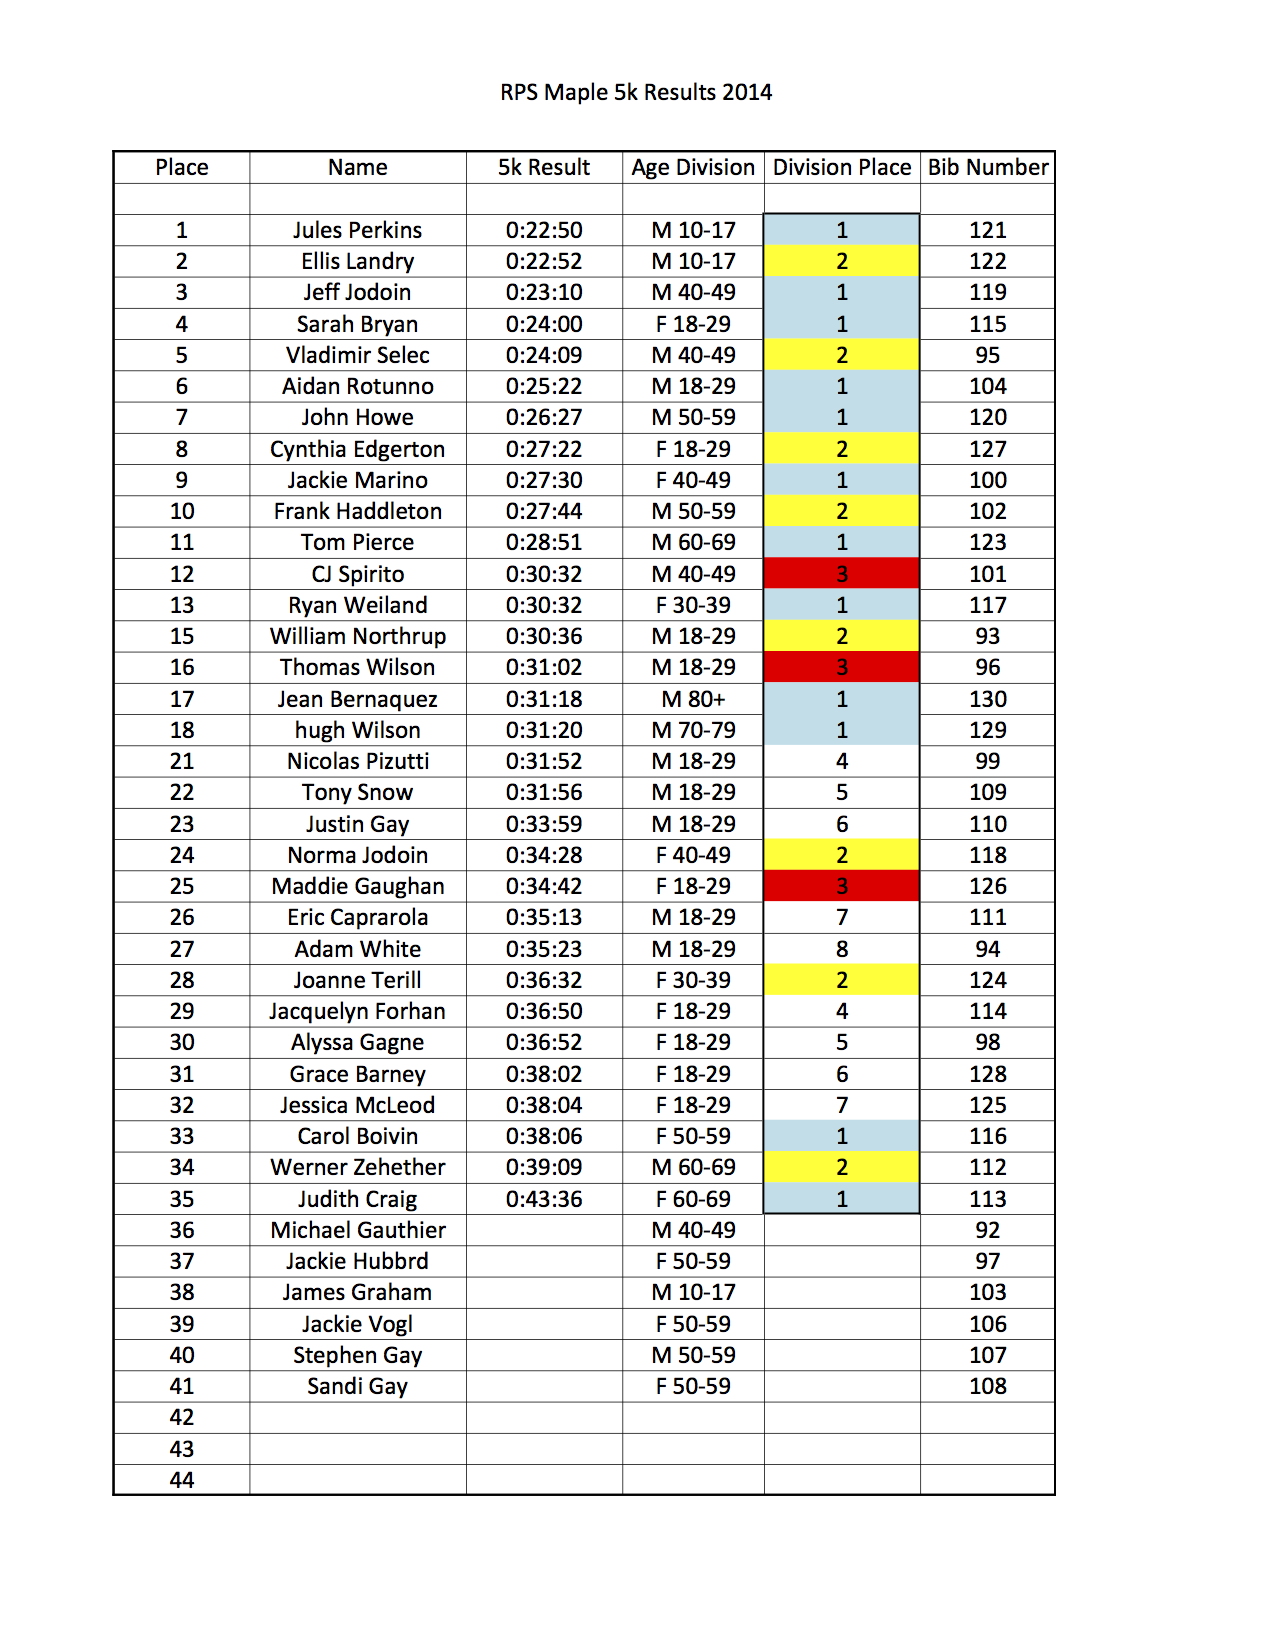 Maple-5K-Overall-Results-2014